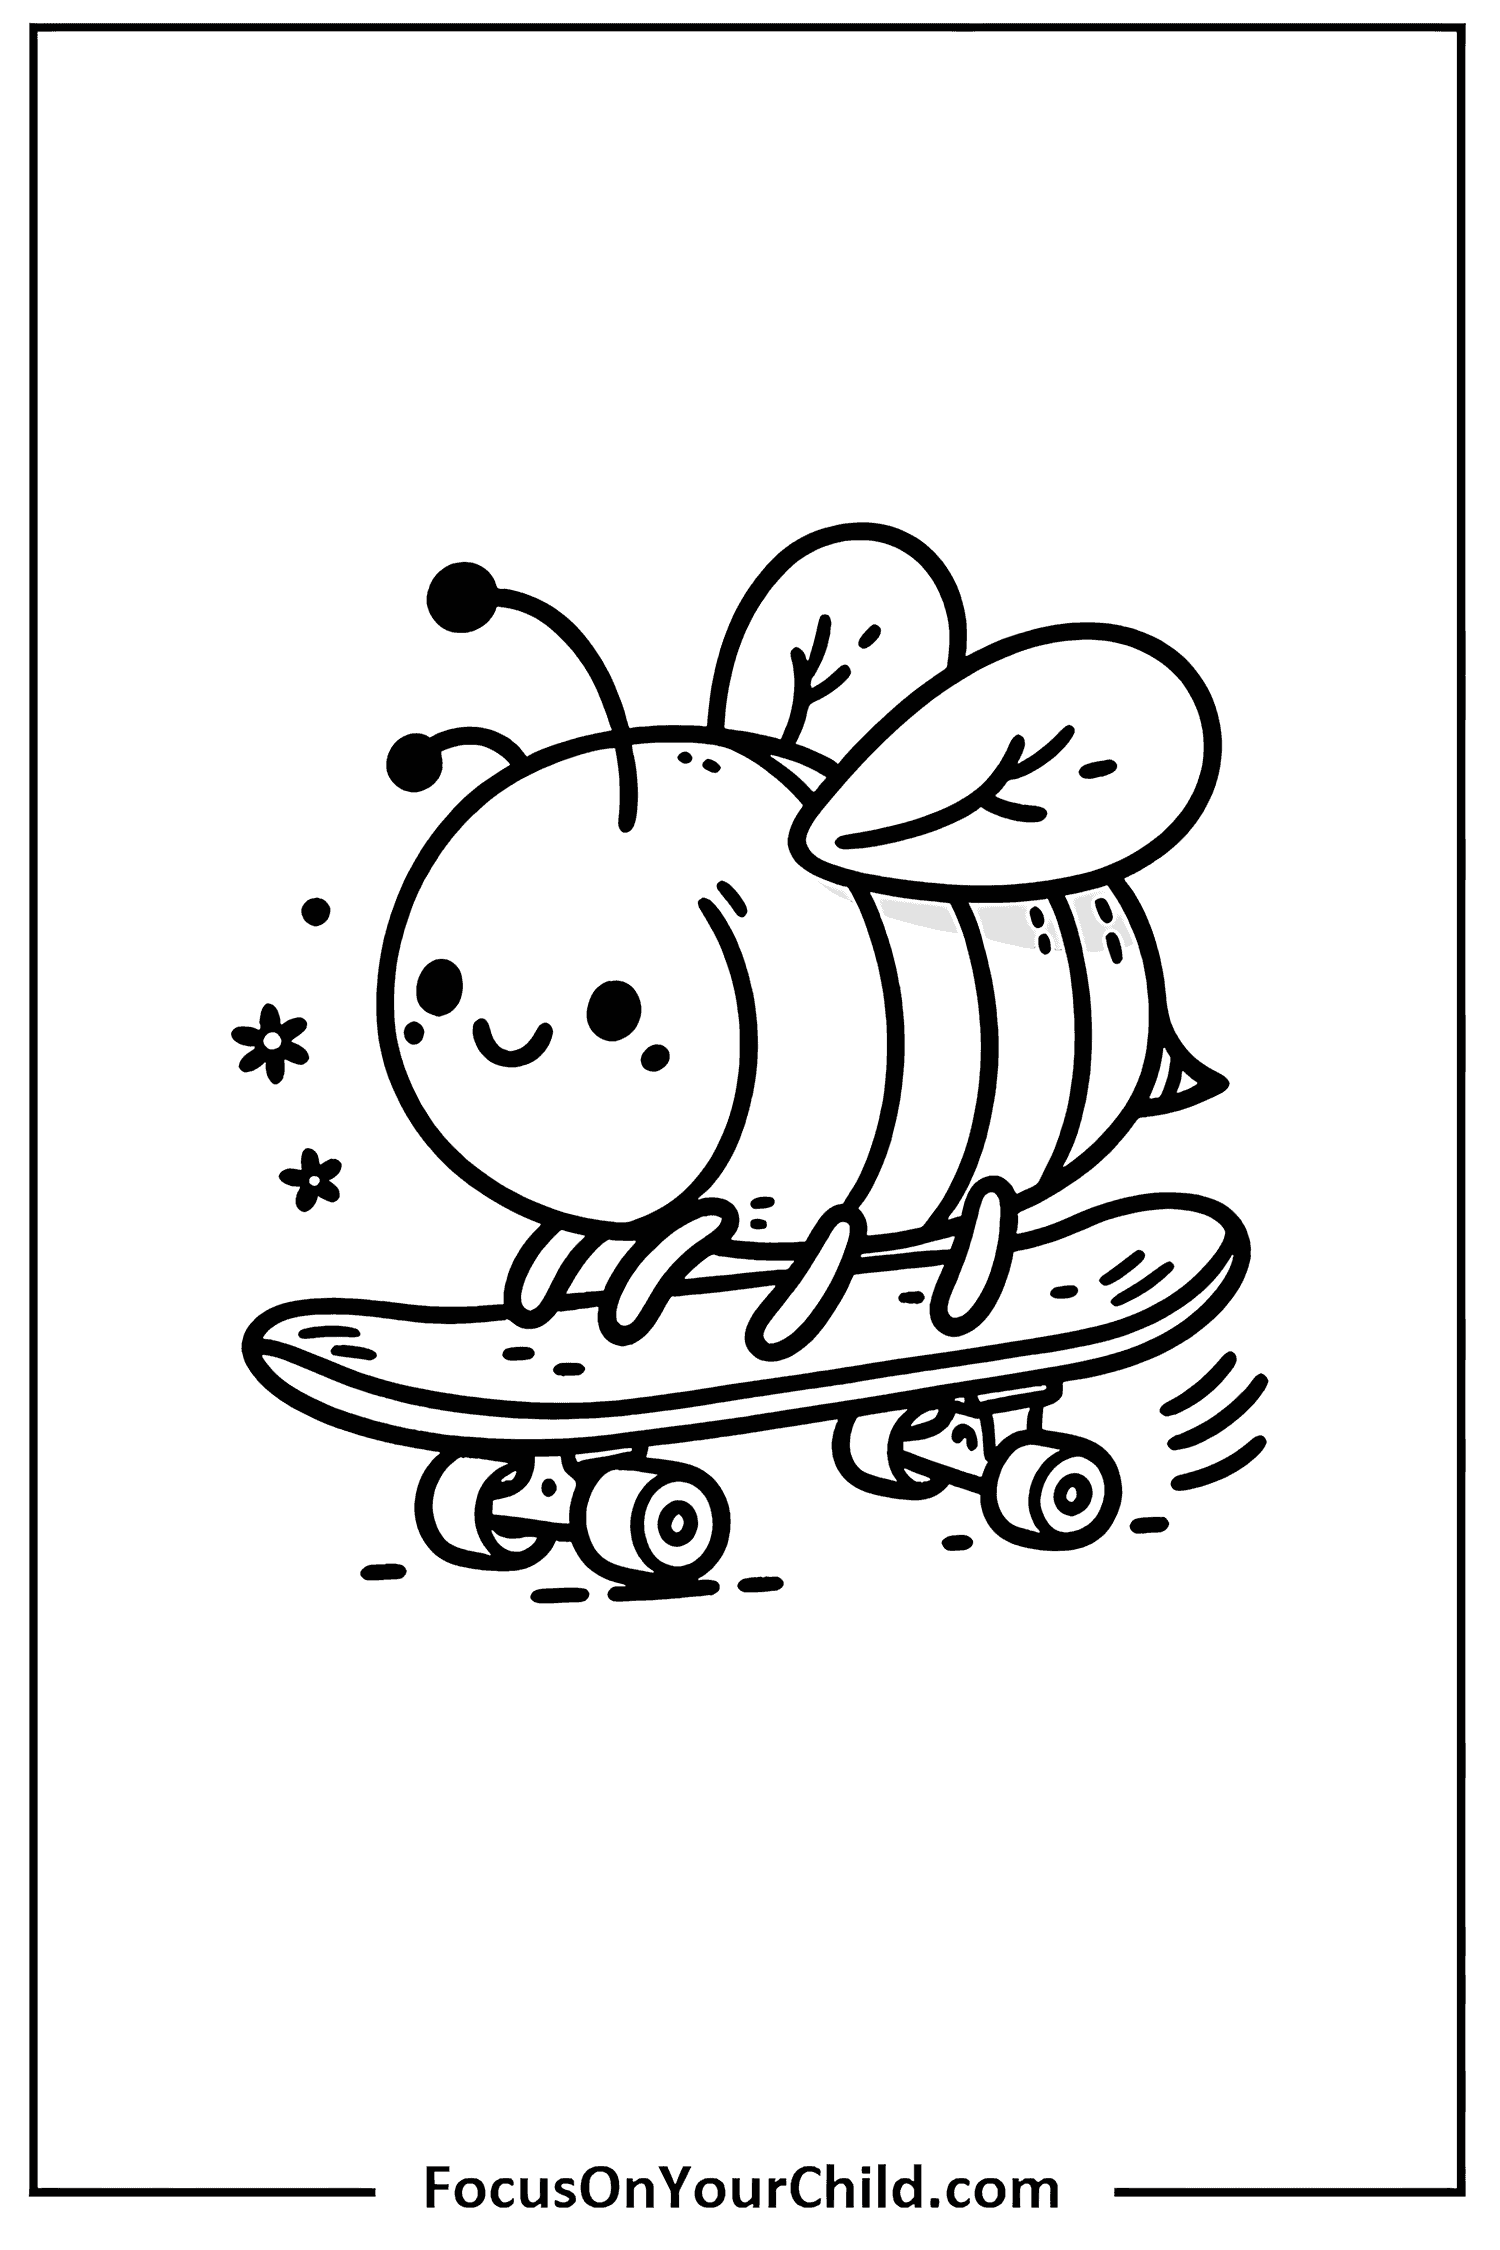 Cartoon bee riding skateboard, whimsical black and white line drawing for kids.